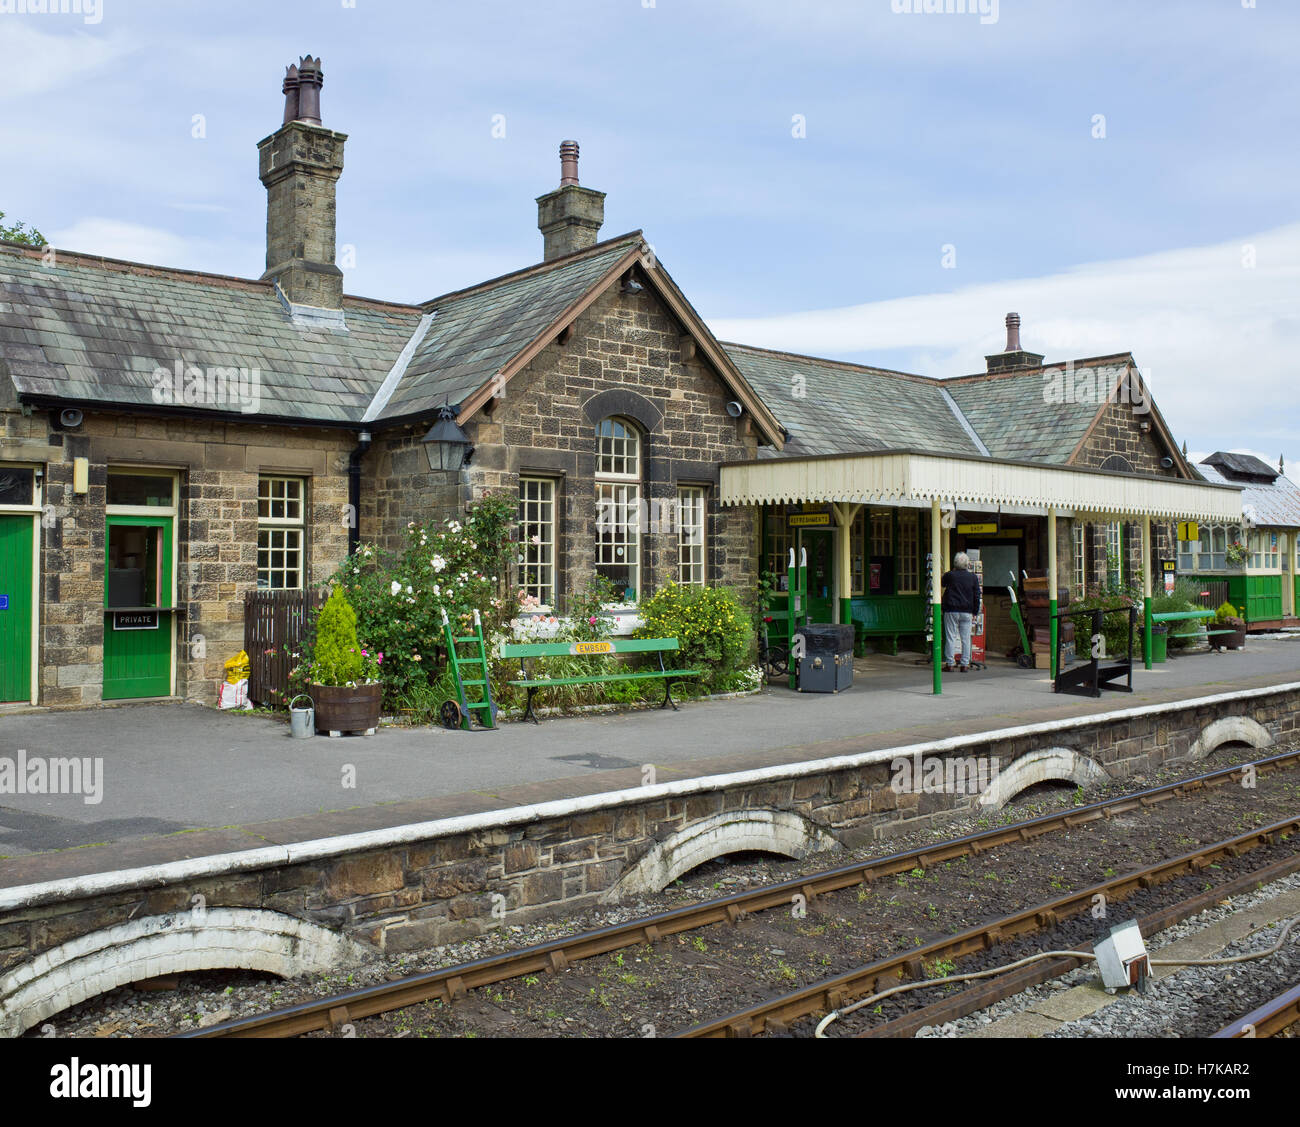 Embsay Station Historic Preserved Railway North Yorkshire UK.  Built in 1888 Stock Photo